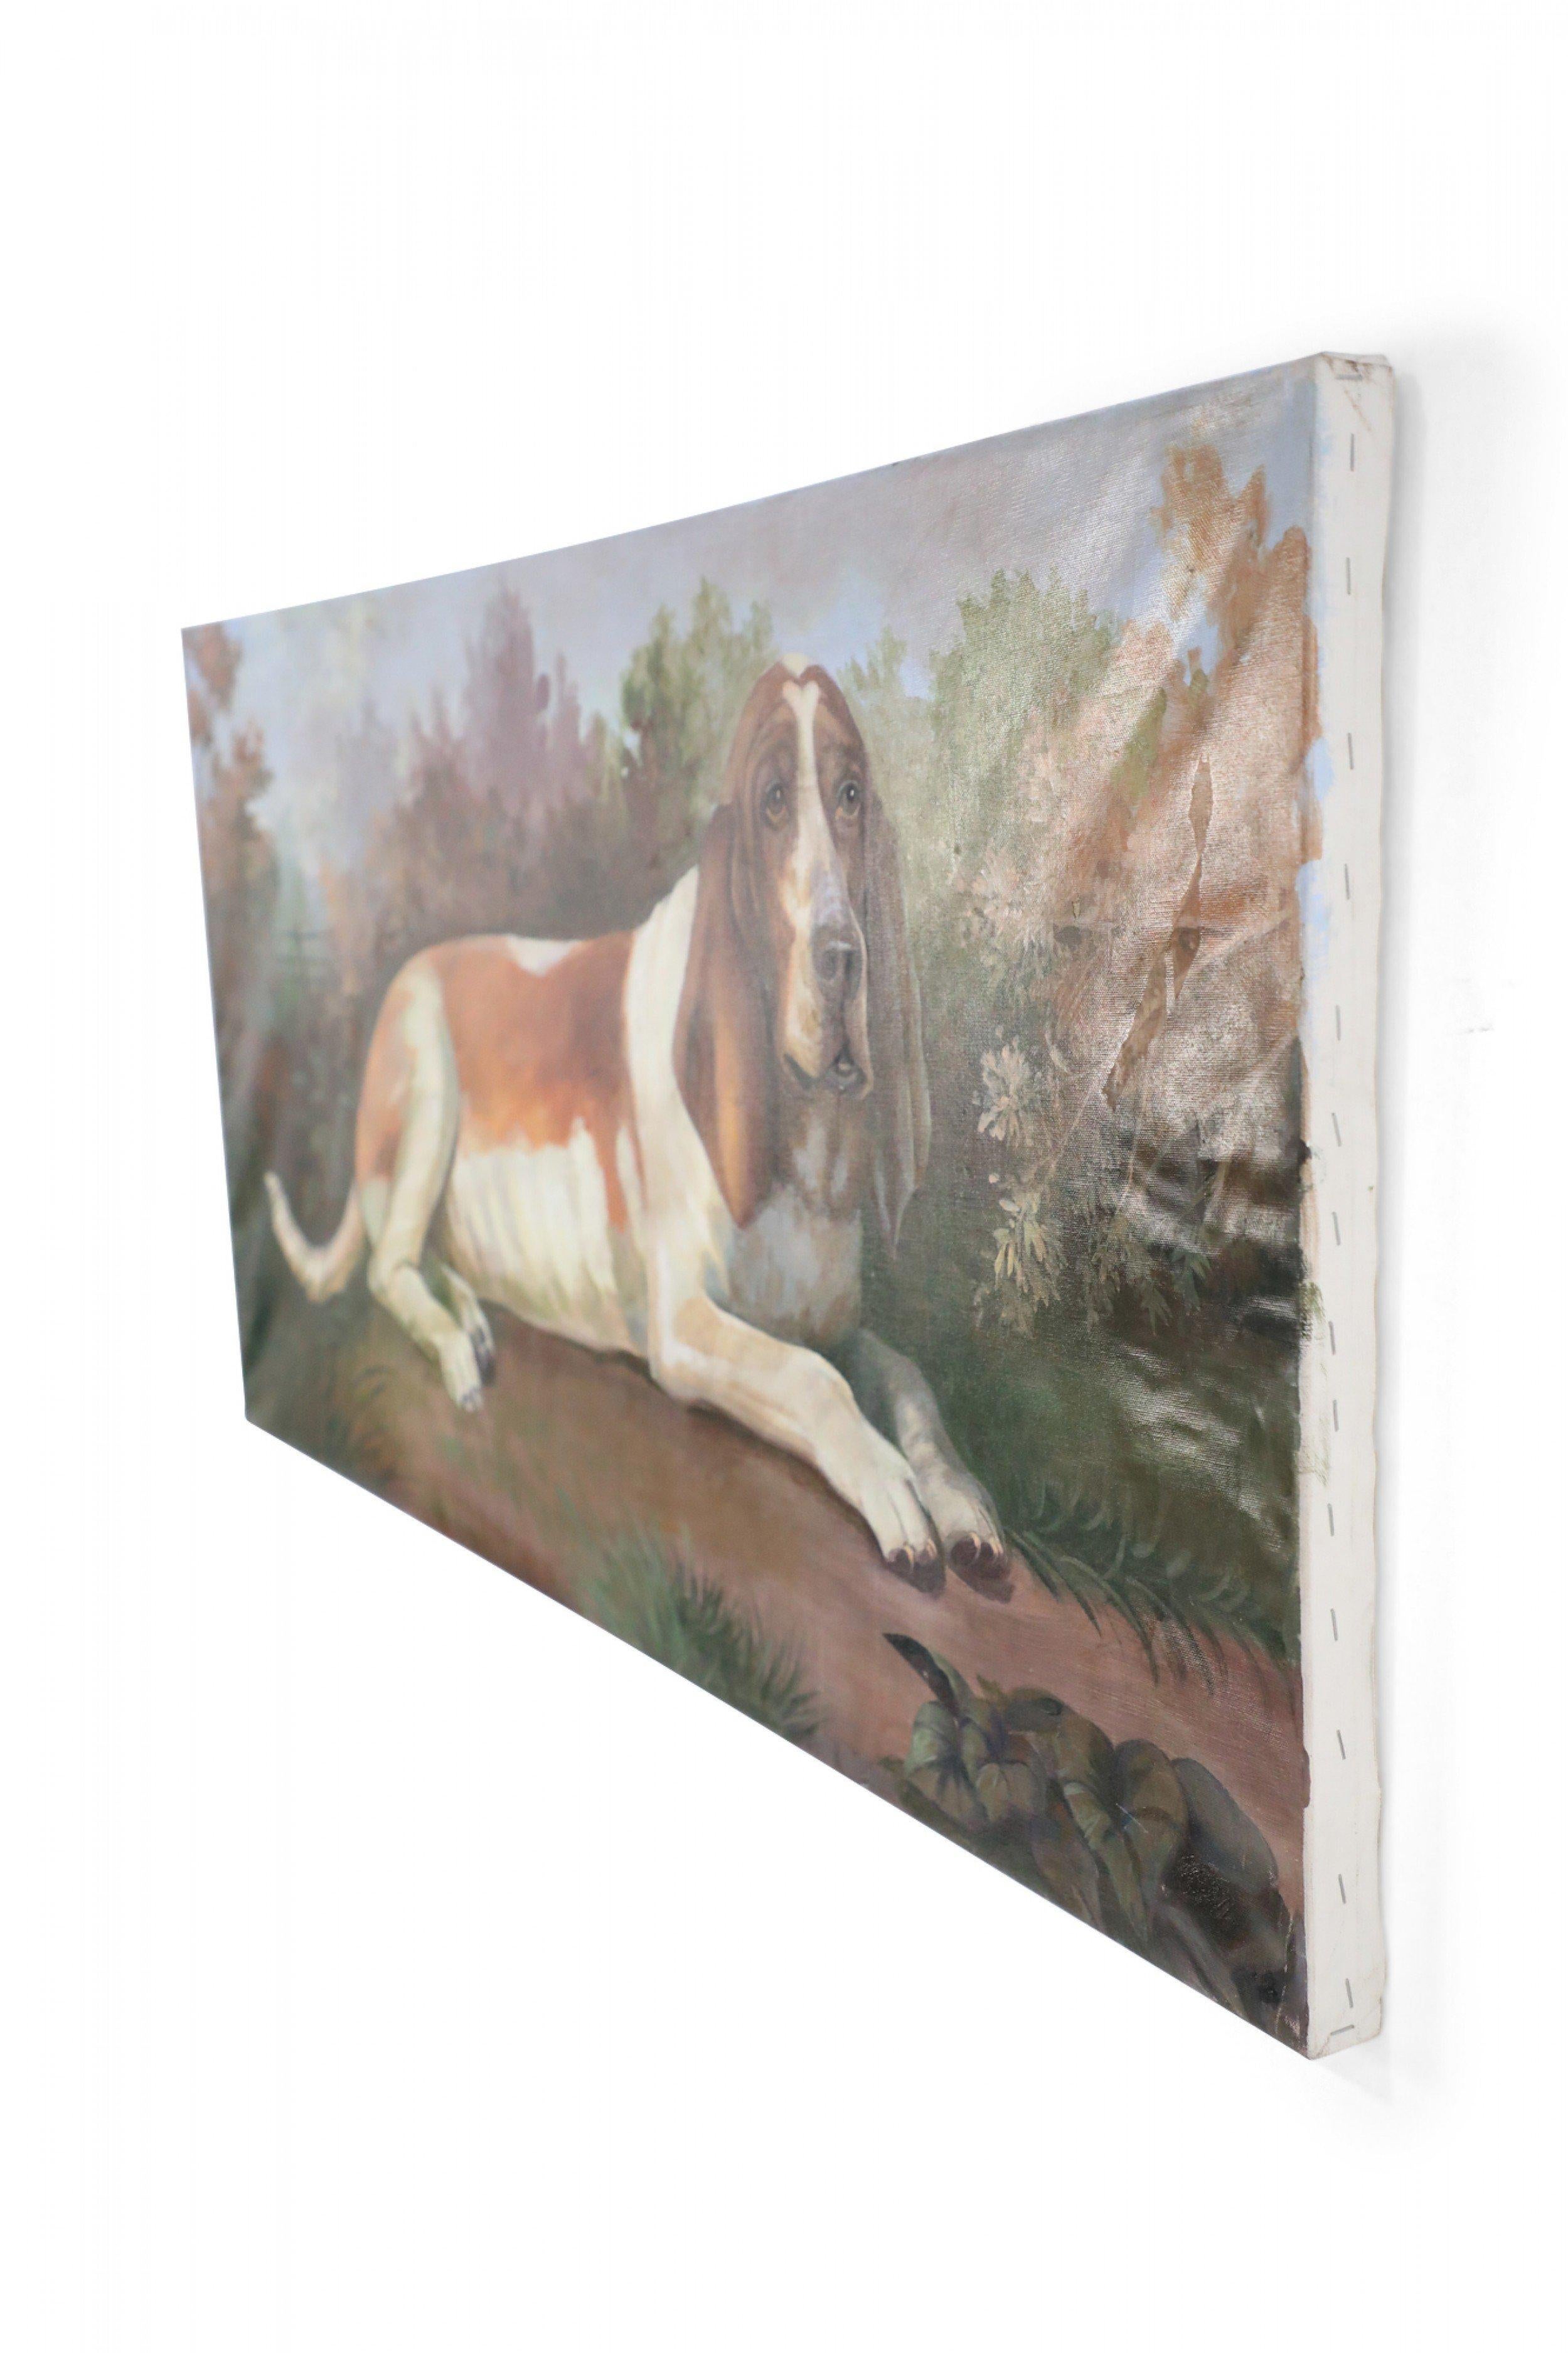 Vintage (20th Century) portrait of a brown and white basset hound captured on a path amid grasses and autumnal plants and trees, on a large rectangular unframed canvas.